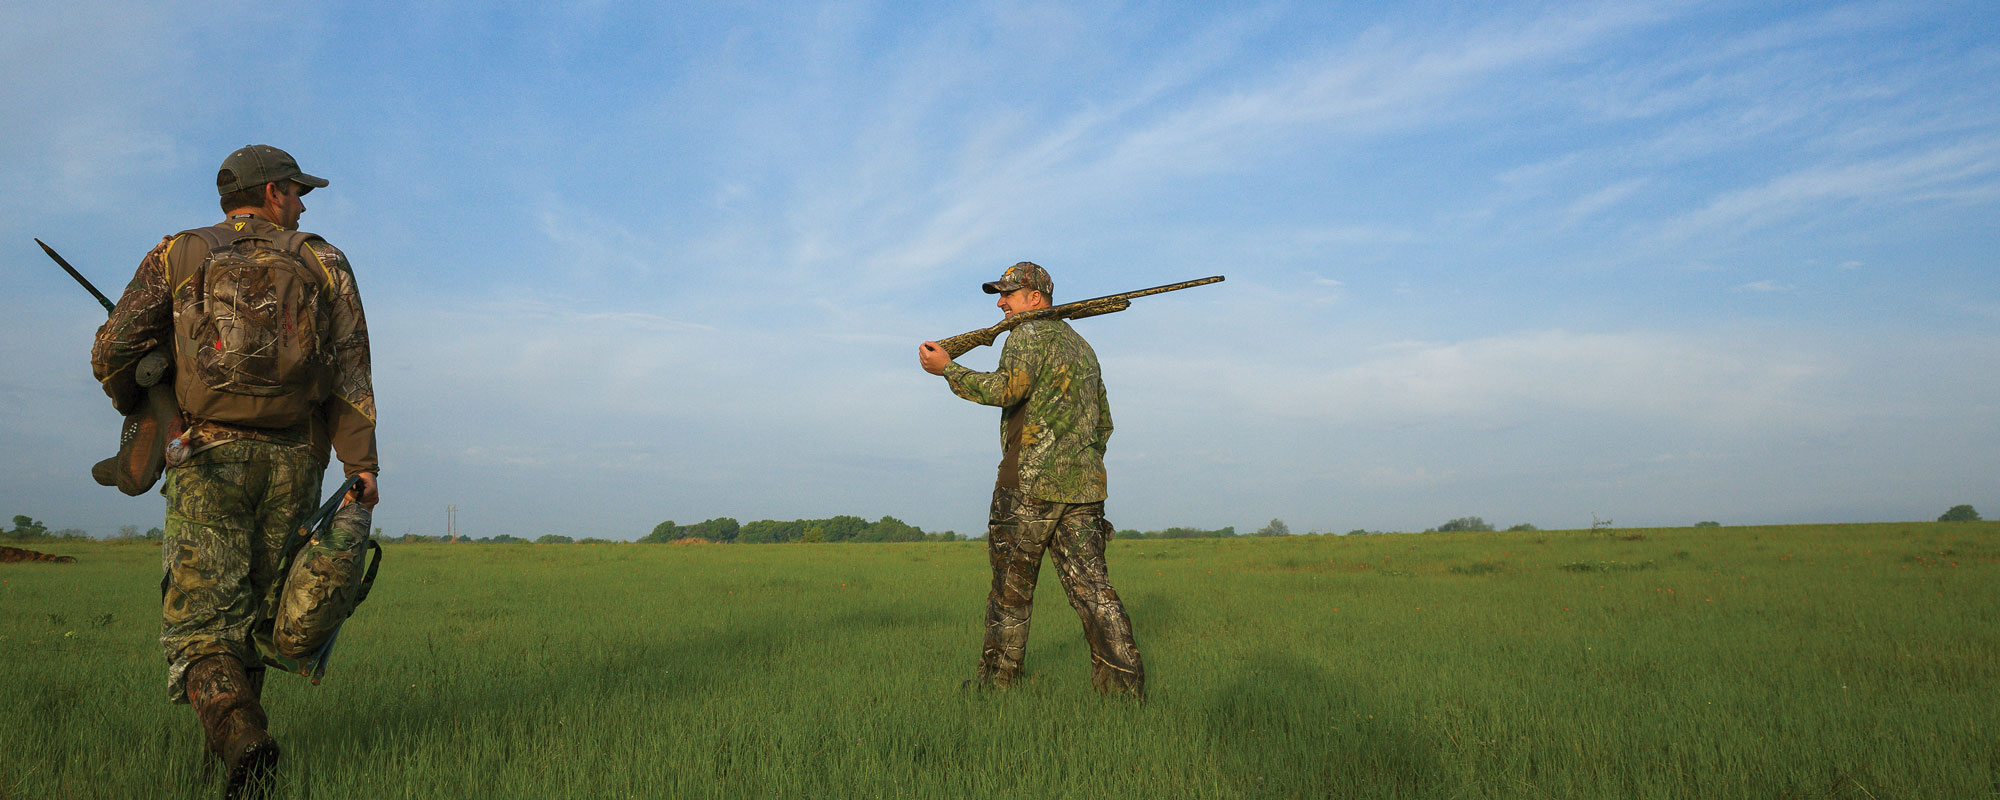 Tips for a Safe Hunting Season